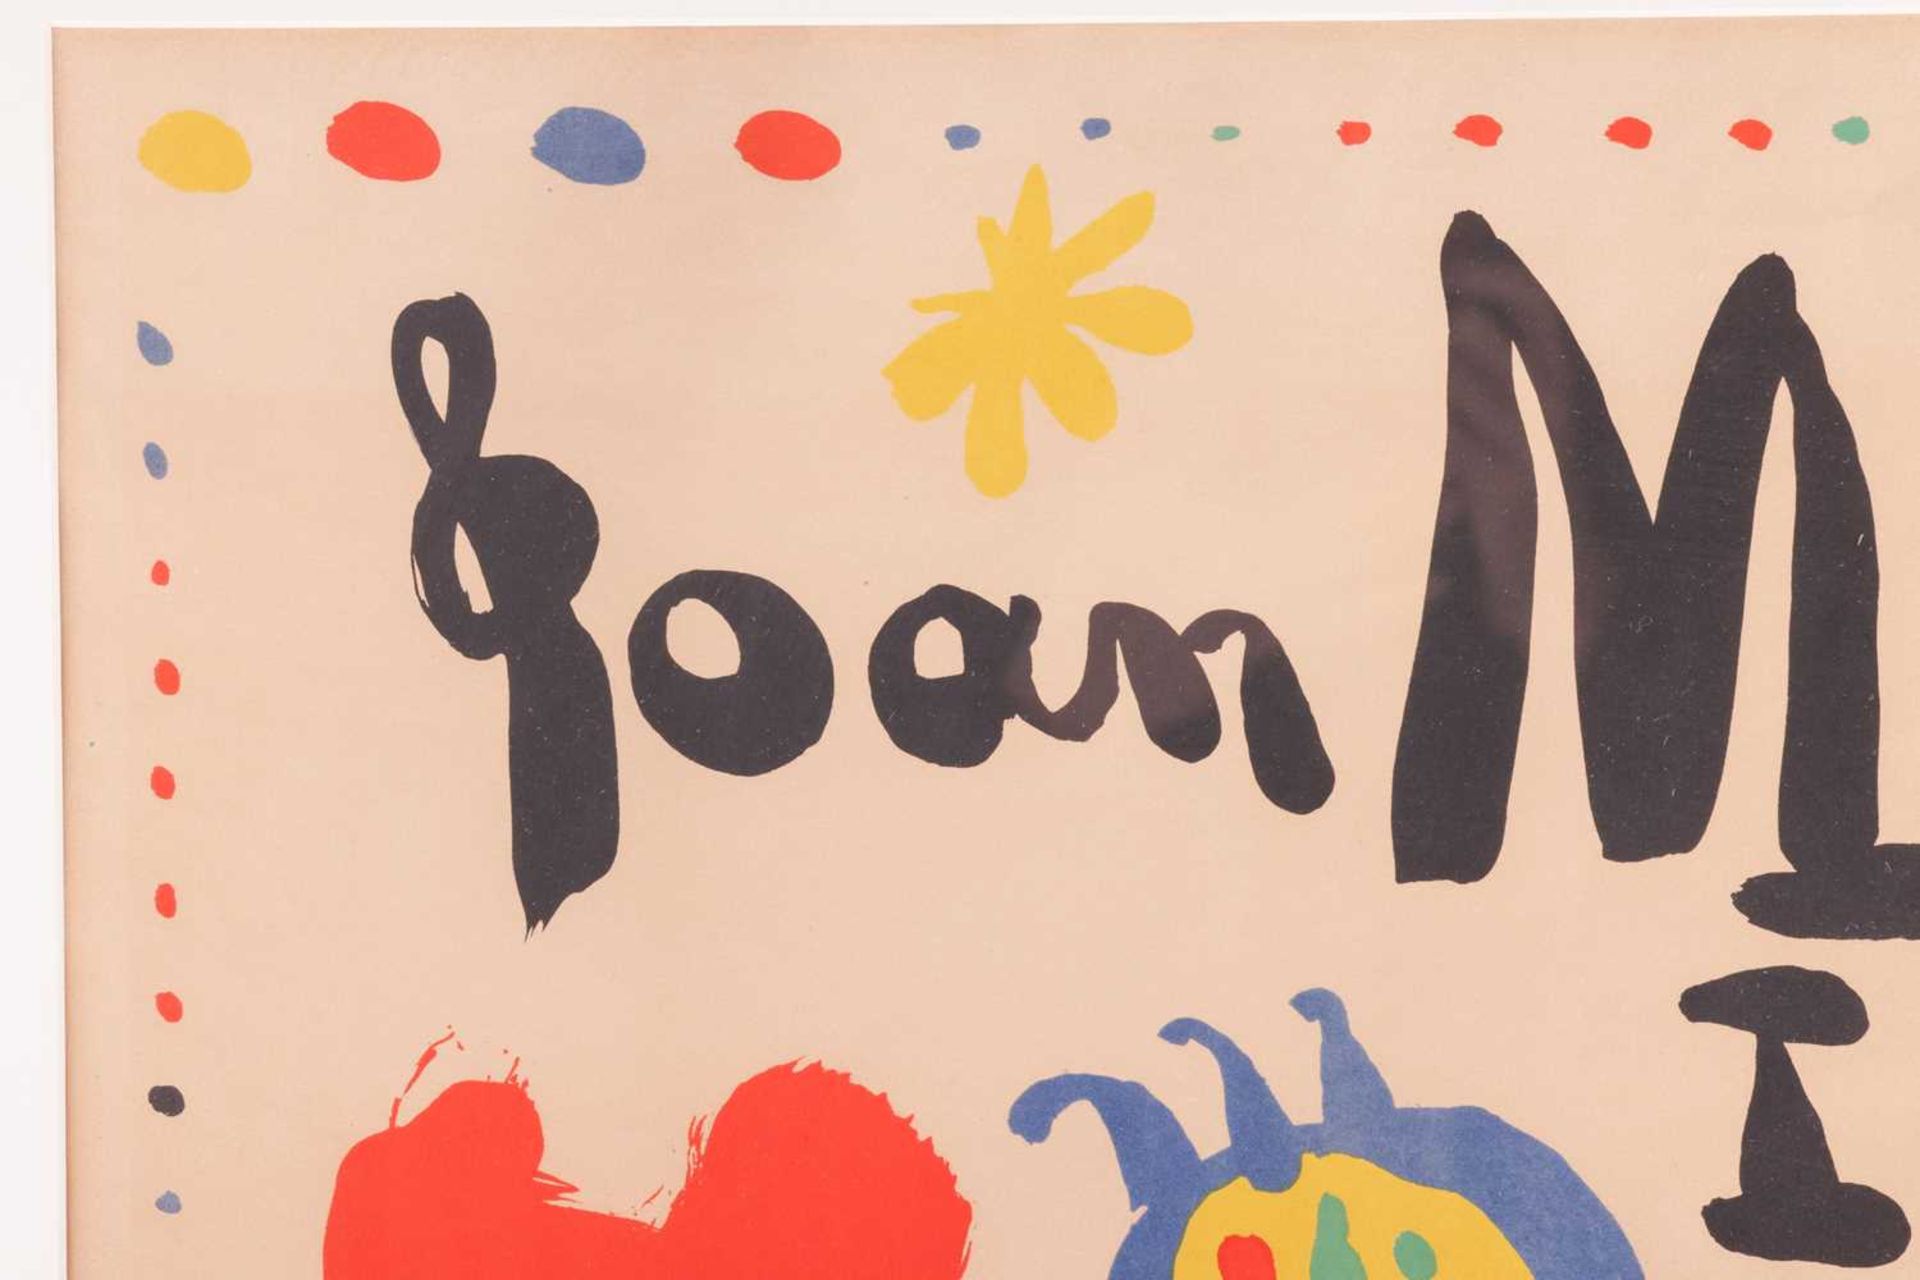 Joan Miro (Spanish, 1893 - 1983), Poster for Exhibition of 1948, signed in pencil (lower left), colo - Image 4 of 7